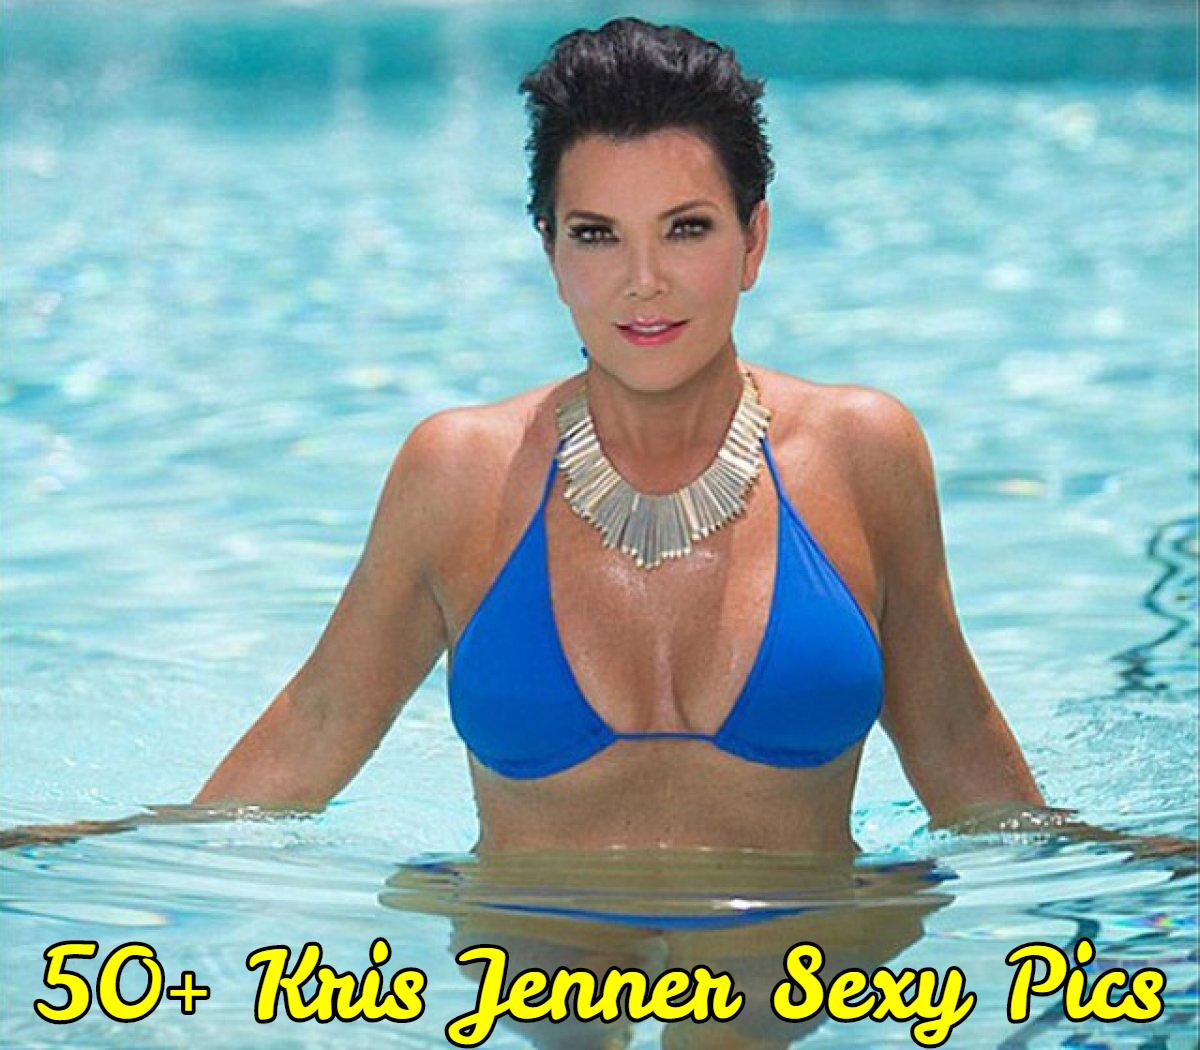 Jenner pictures kris leaked 51 Hottest